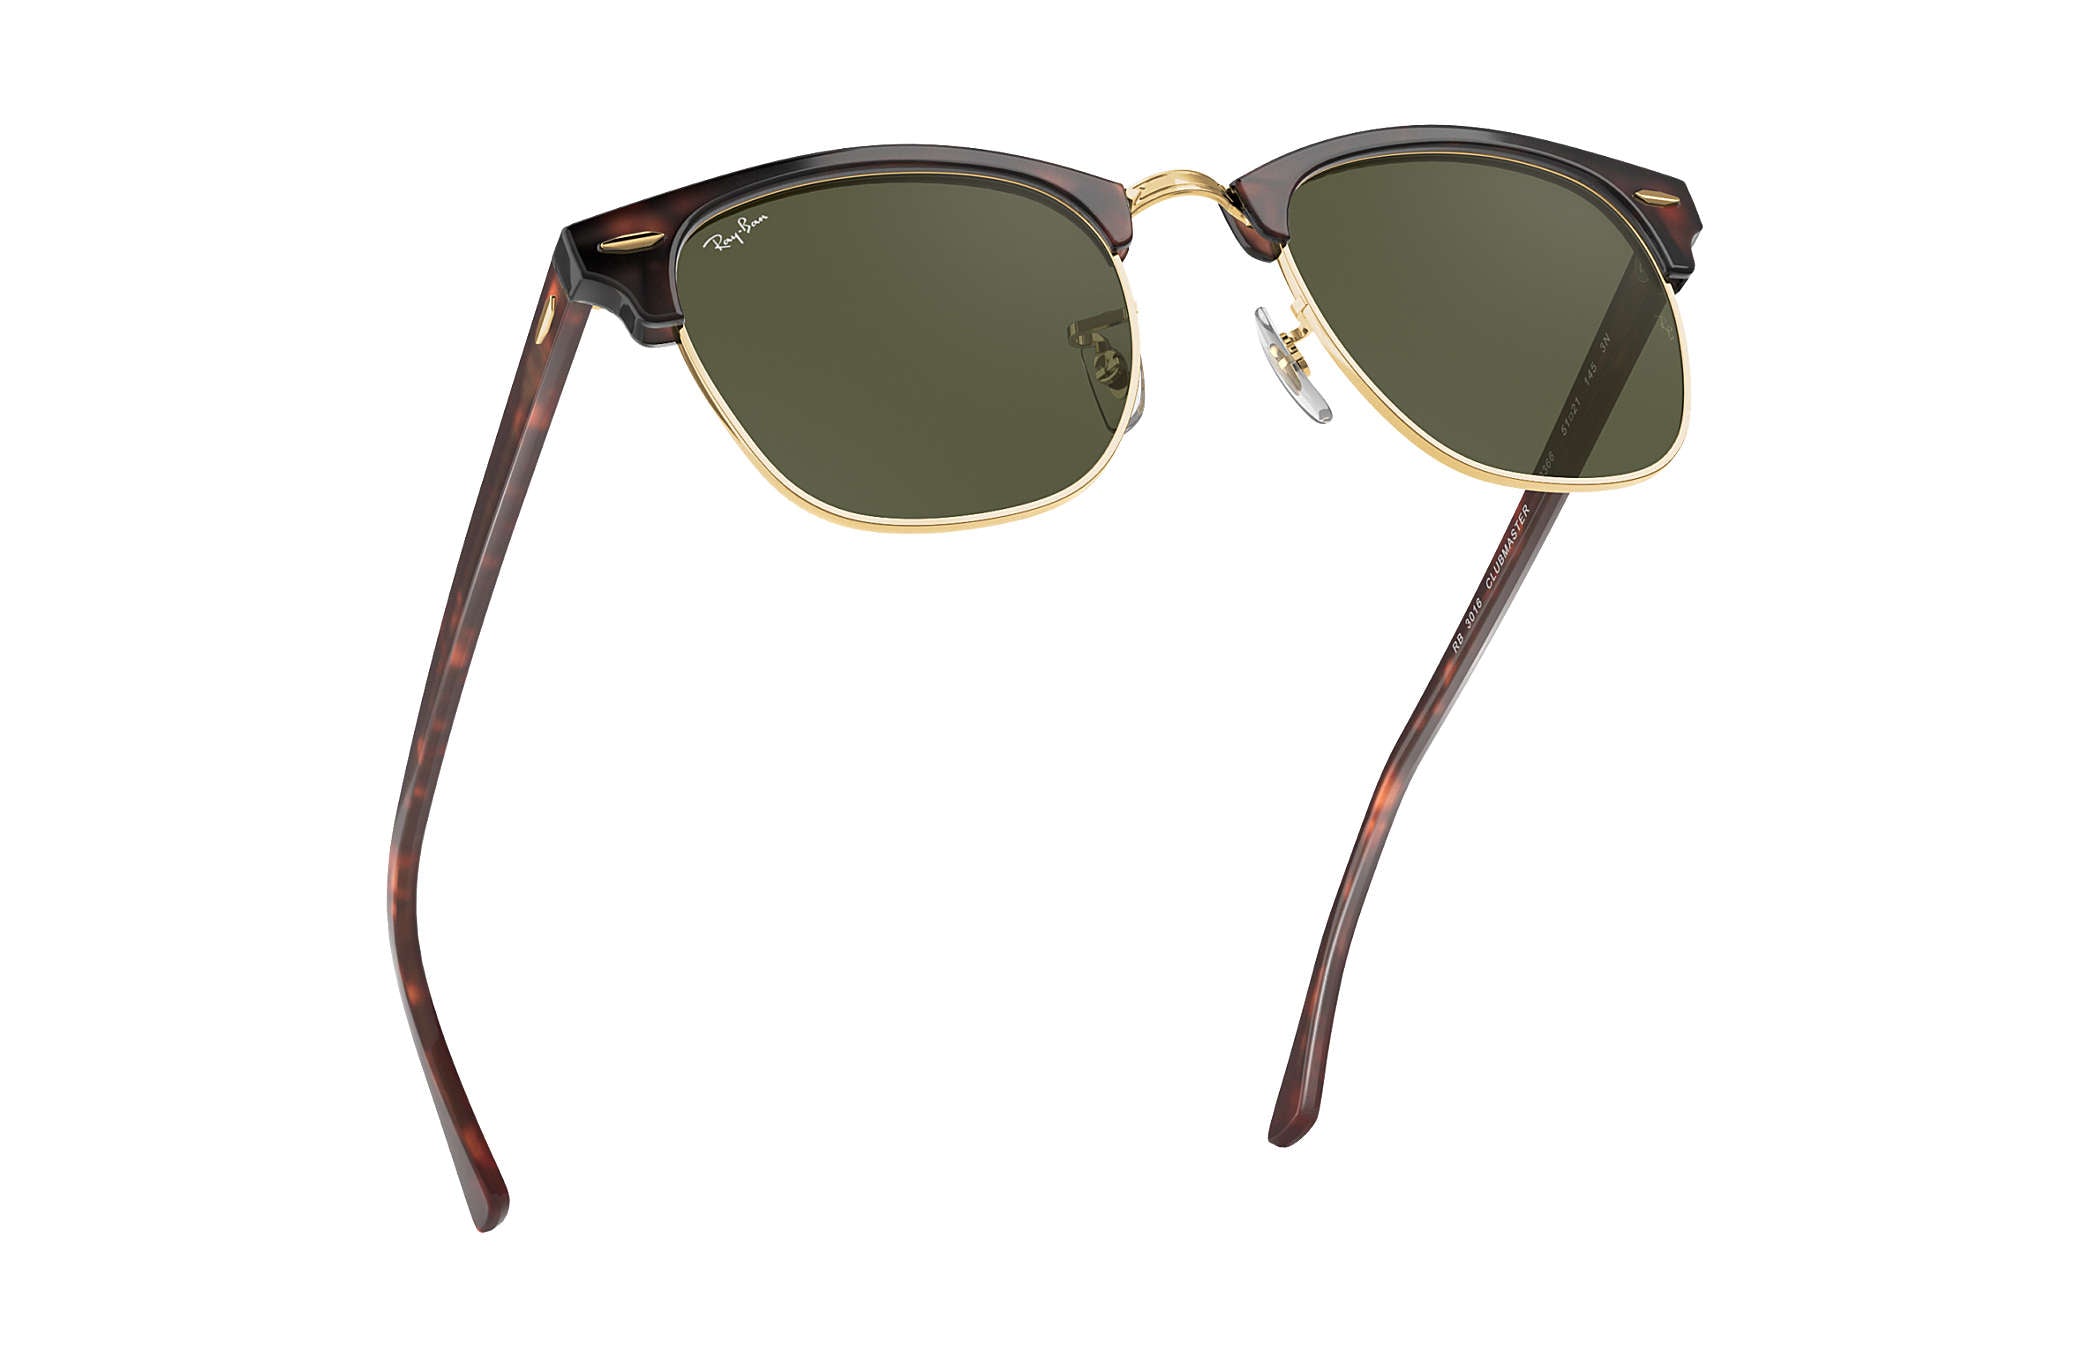 throne To contribute Normal Ray-Ban RB3016 - Clubmaster Sunglasses